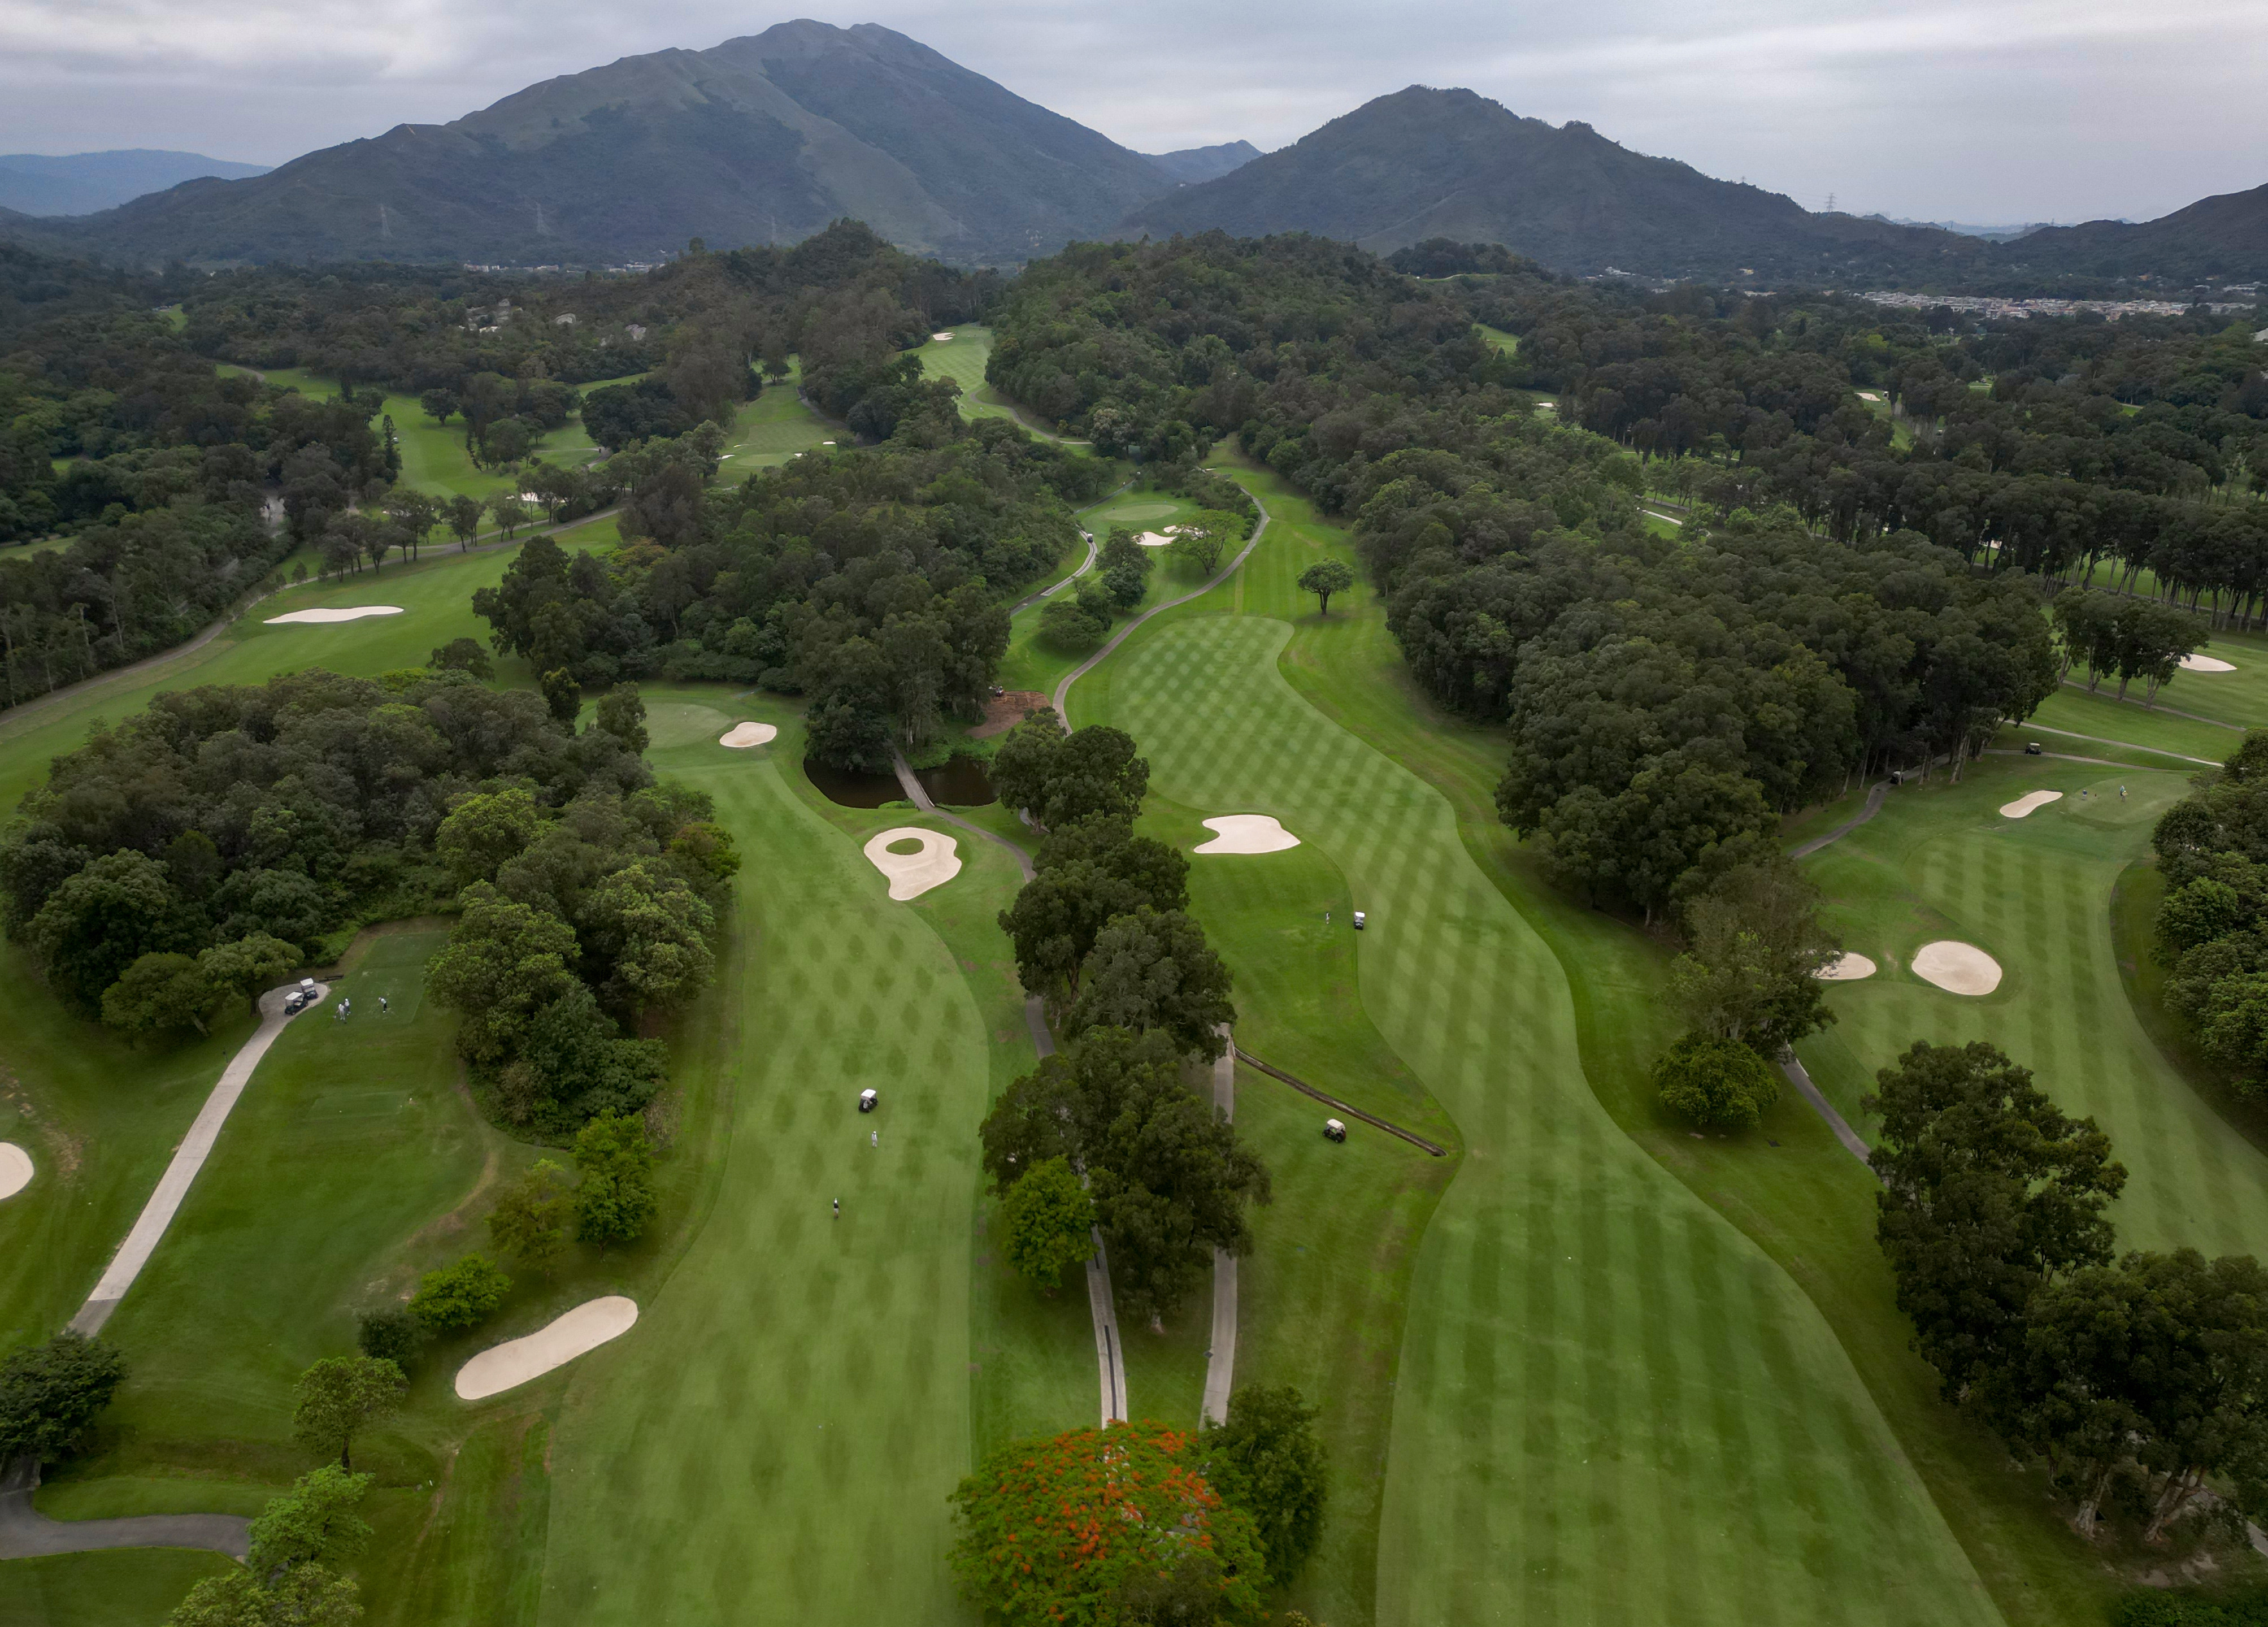 The Hong Kong Golf Club at Fanling, seen on May 2. A heritage golf course should not be sacrificed for housing when alternatives exist. Photo: May Tse